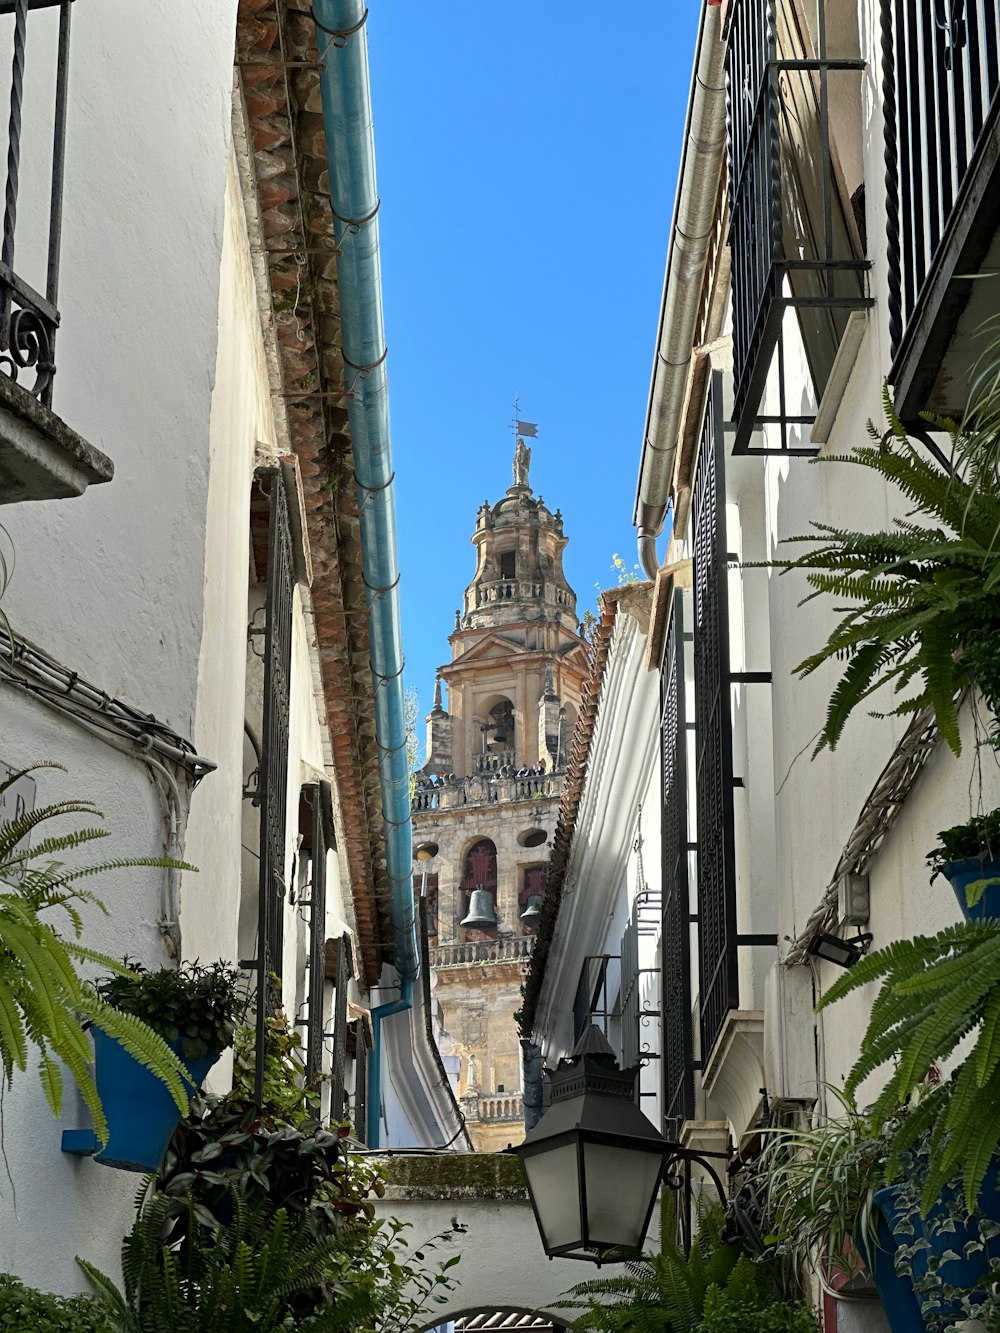 a narrow alley way with a clock tower in the background